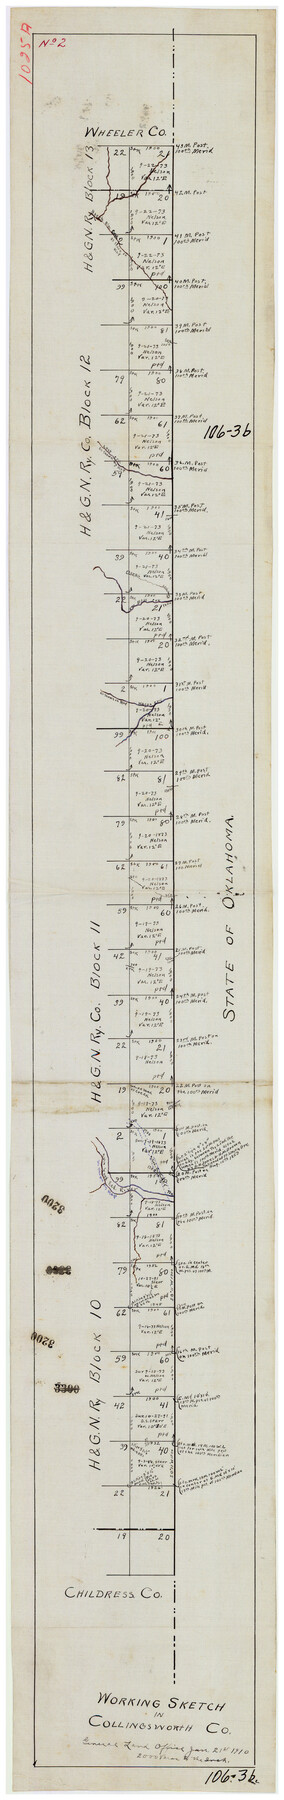 90728, Working Sketch in Collingsworth County, Twichell Survey Records